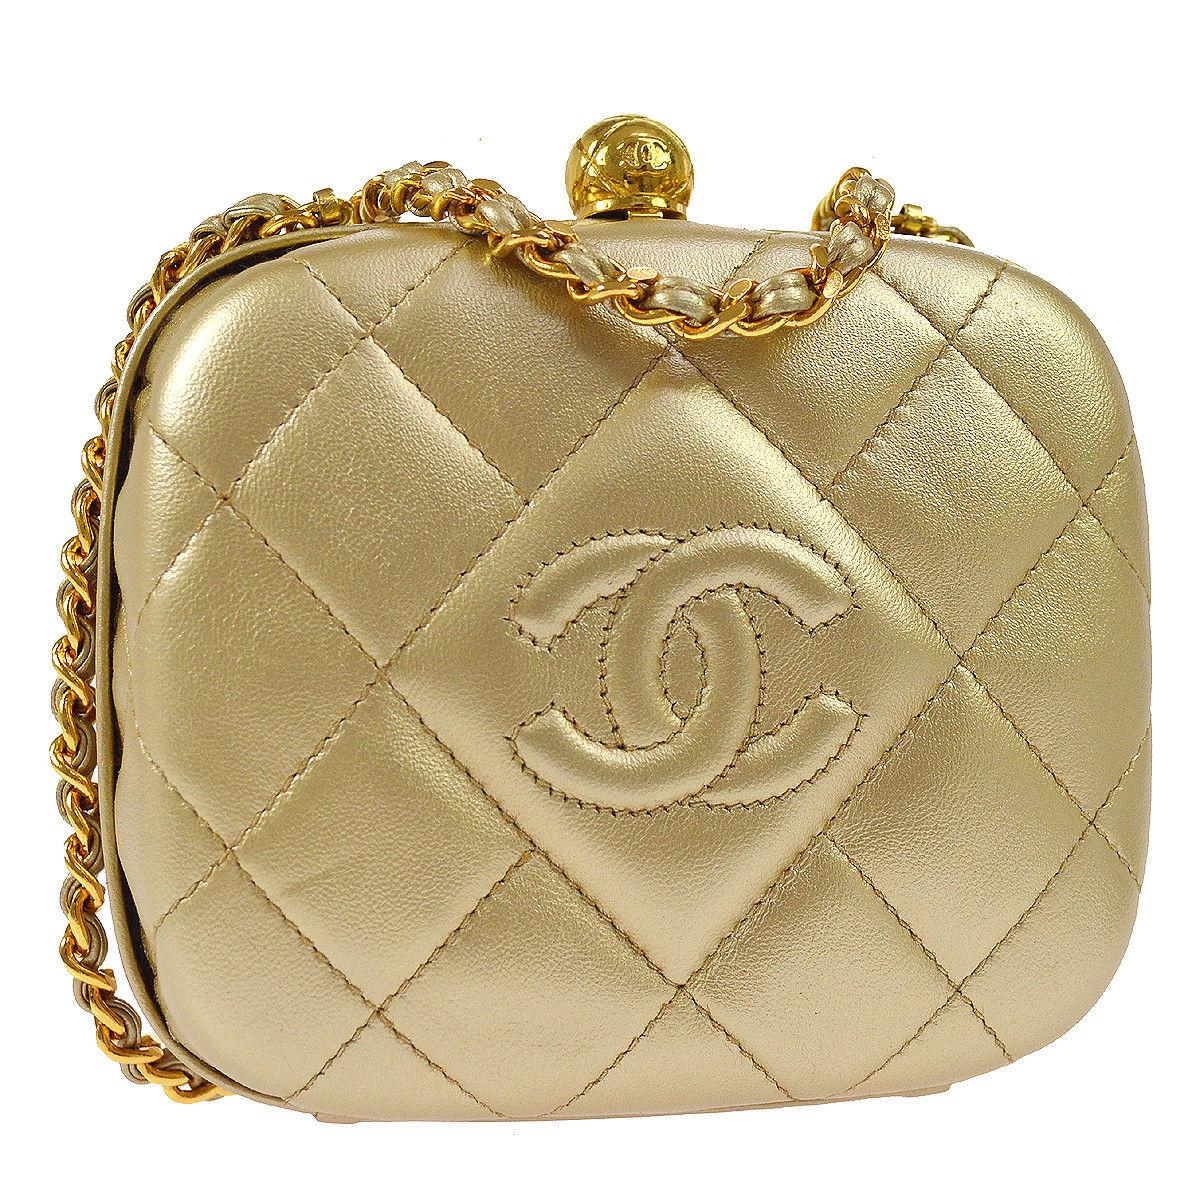 Chanel Gold Leather Kisslock Evening Small Party 2 in 1 Flap Shoulder Bag  in Box